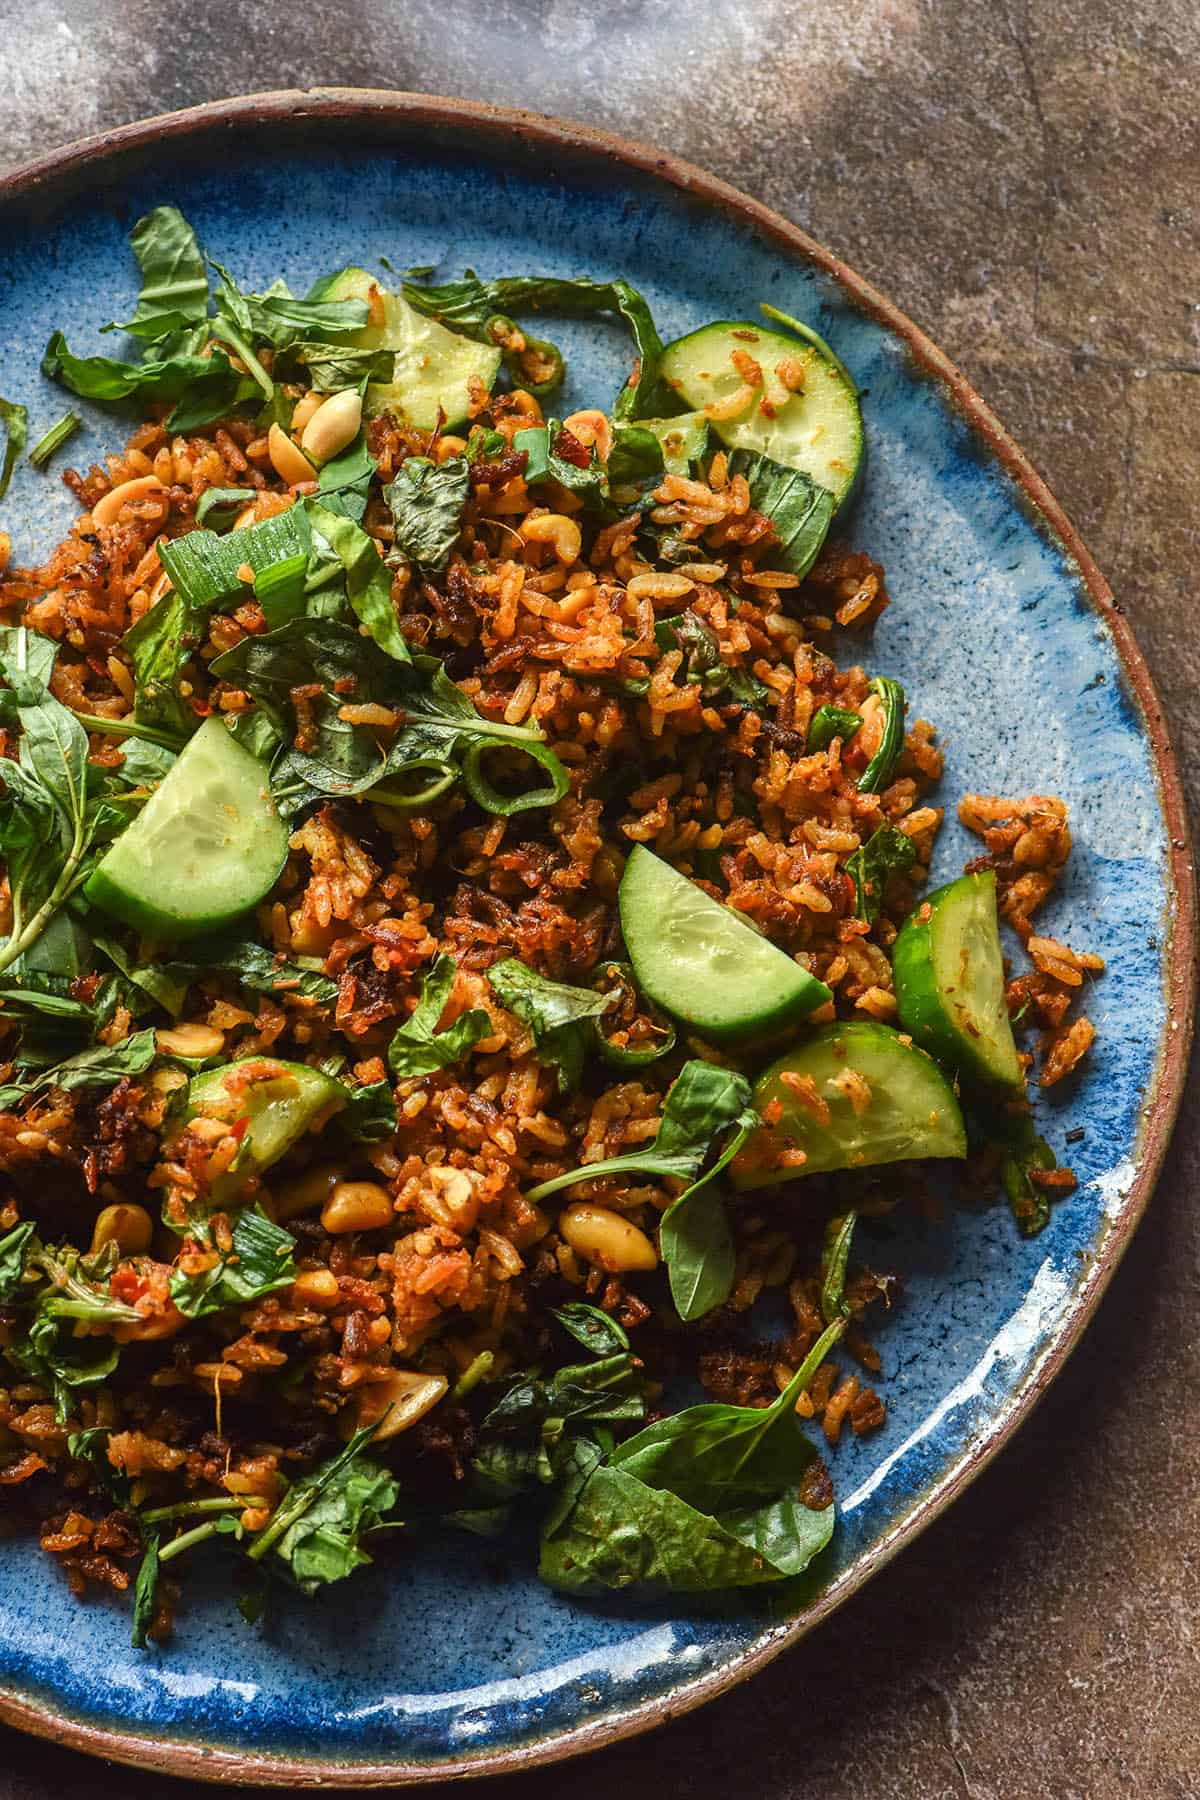 An aerial image of a bright blue ceramic plate topped with a crispy red rice salad, cucumbers, herbs and peanuts.